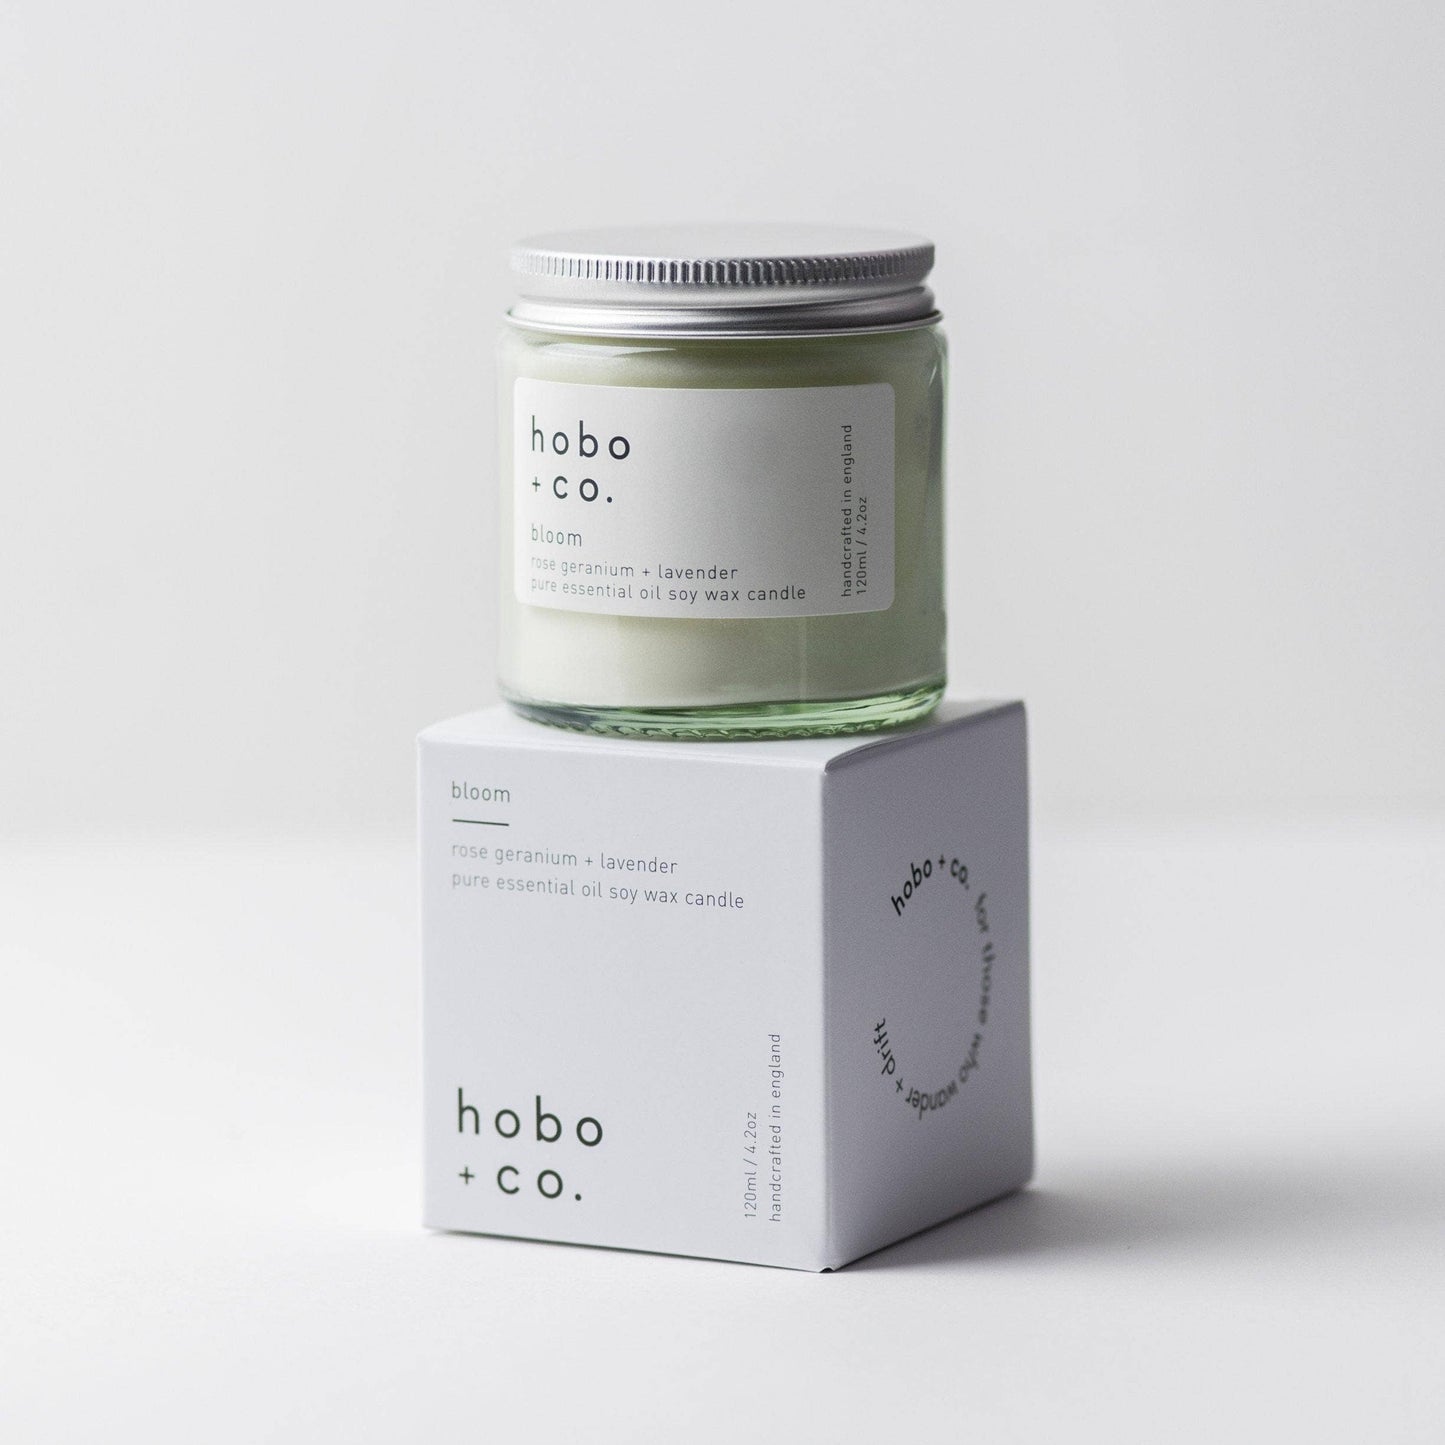 Hobo+Co Bloom Small Essential Oil Soy Wax Candle at Joetie Home Fragrance. Luxury Handmade Apothecary Soy Candles